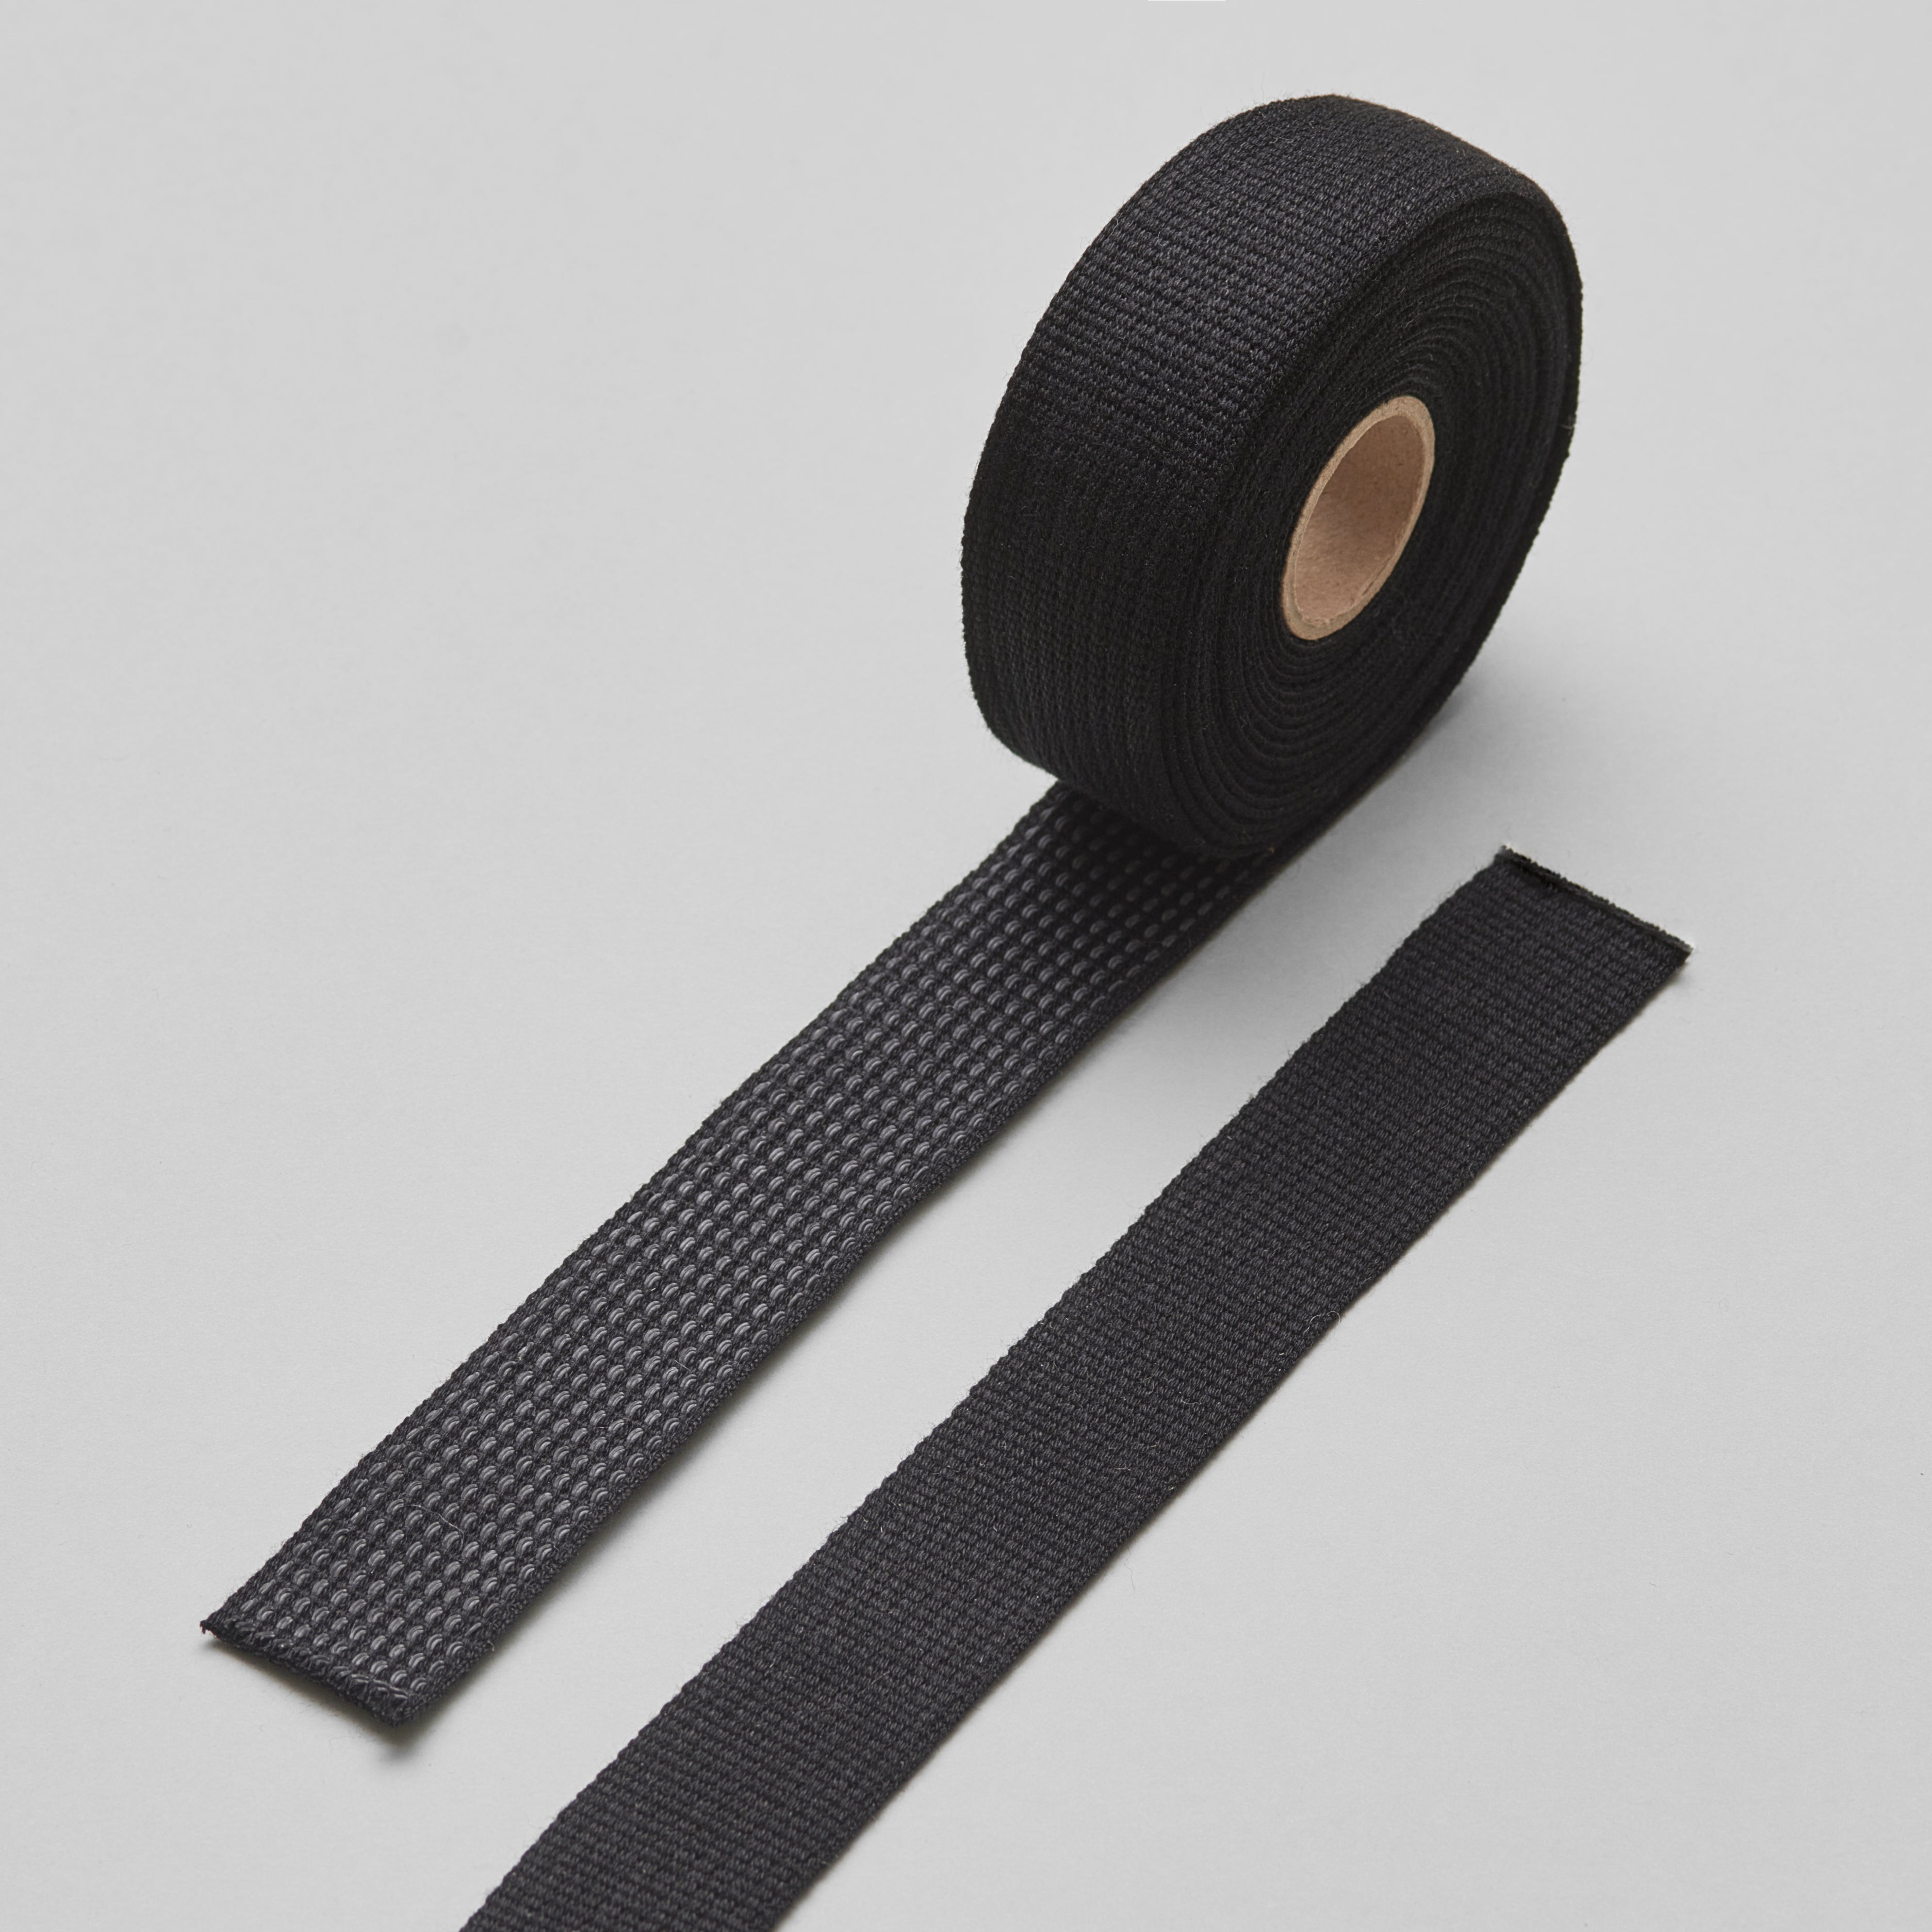 Double-Sided Sticky Strips™ Hold Straps in Place